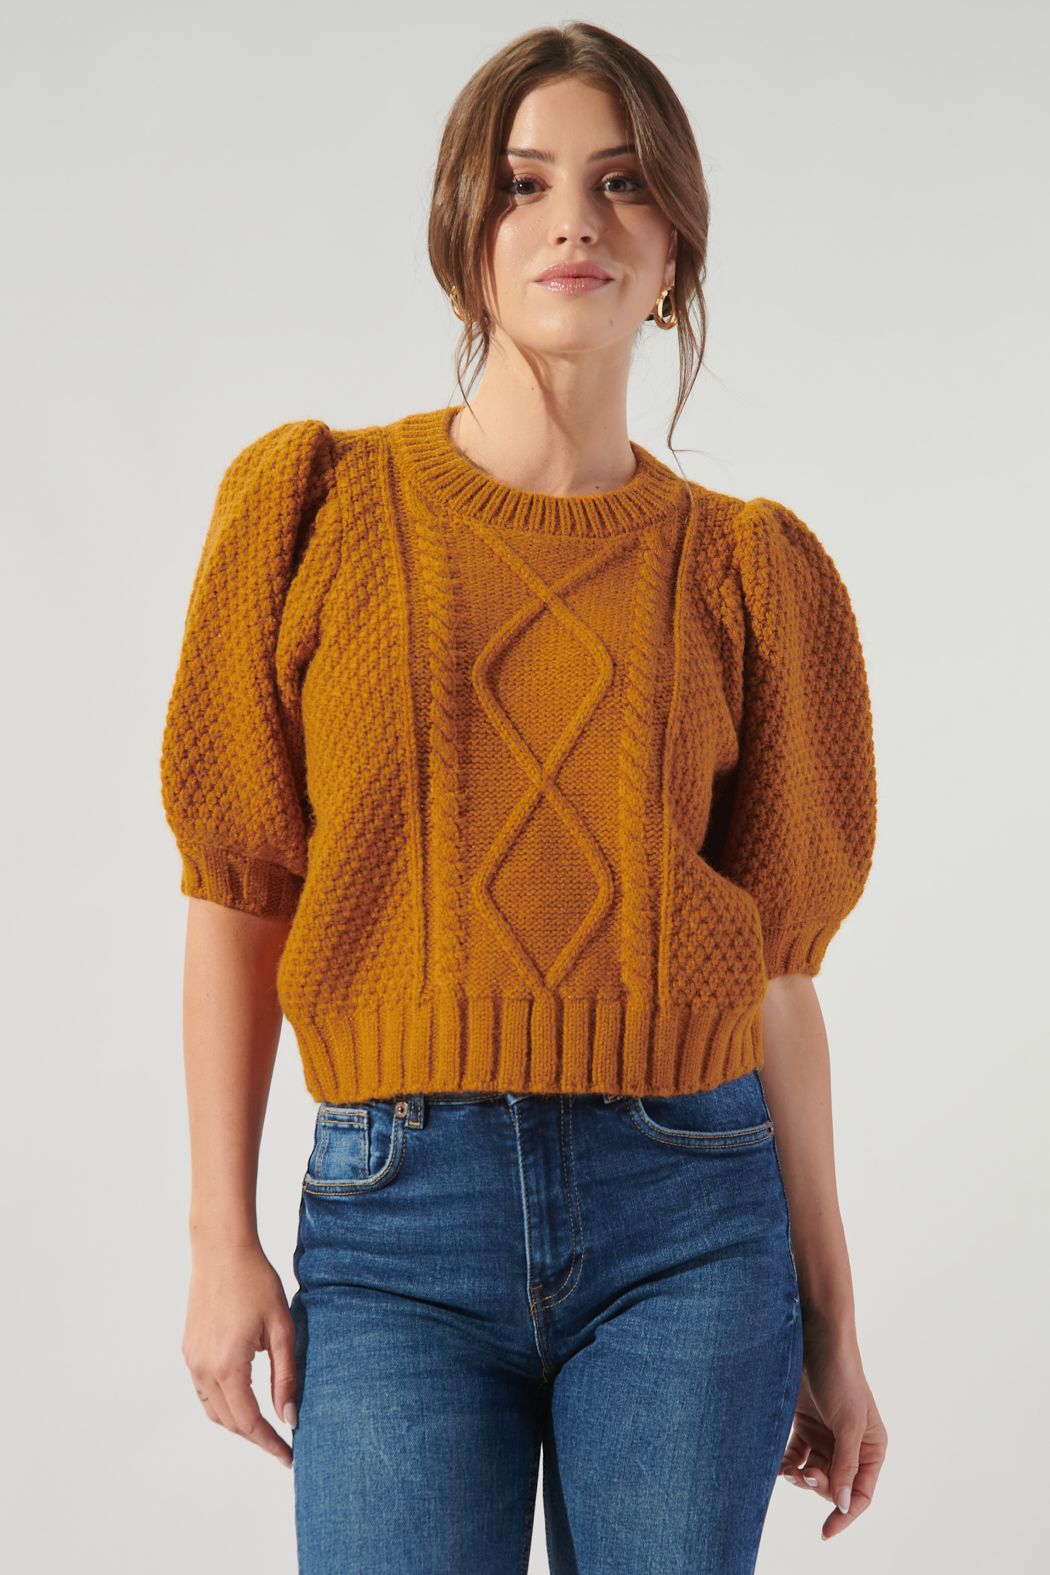 The Wish You Well Puff Sleeve Sweater